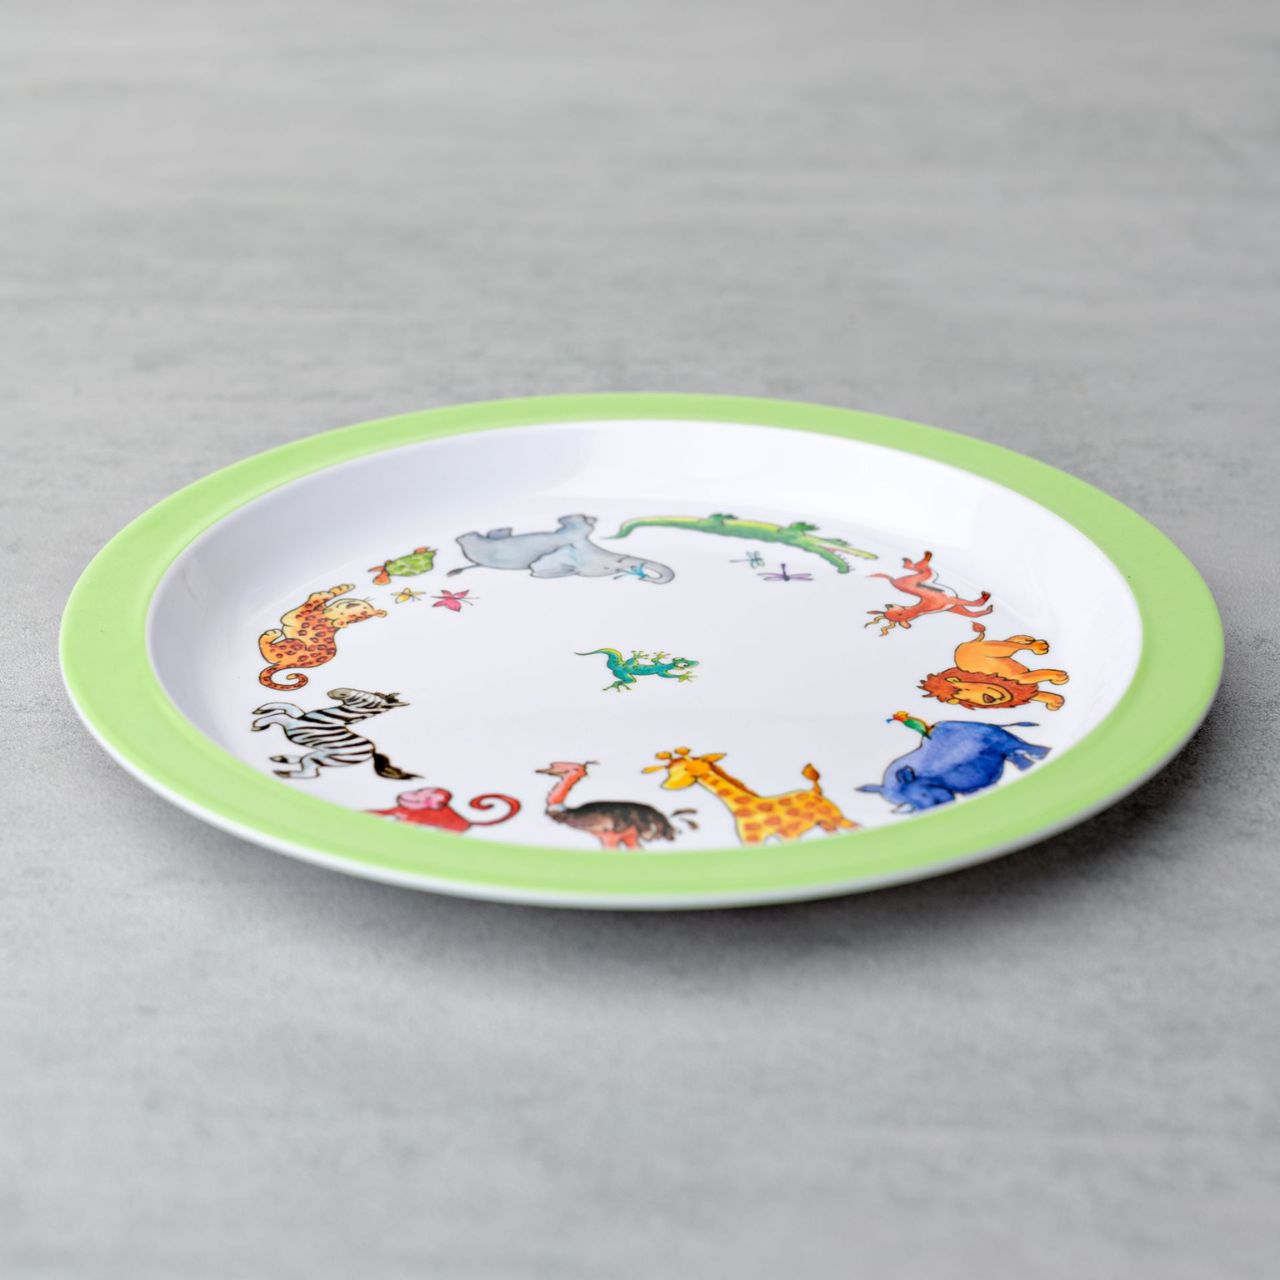 Make mealtimes extra fun with this awesome Safari melamine dining set. From the Martin Gulliver collection by Just 4 Kids.